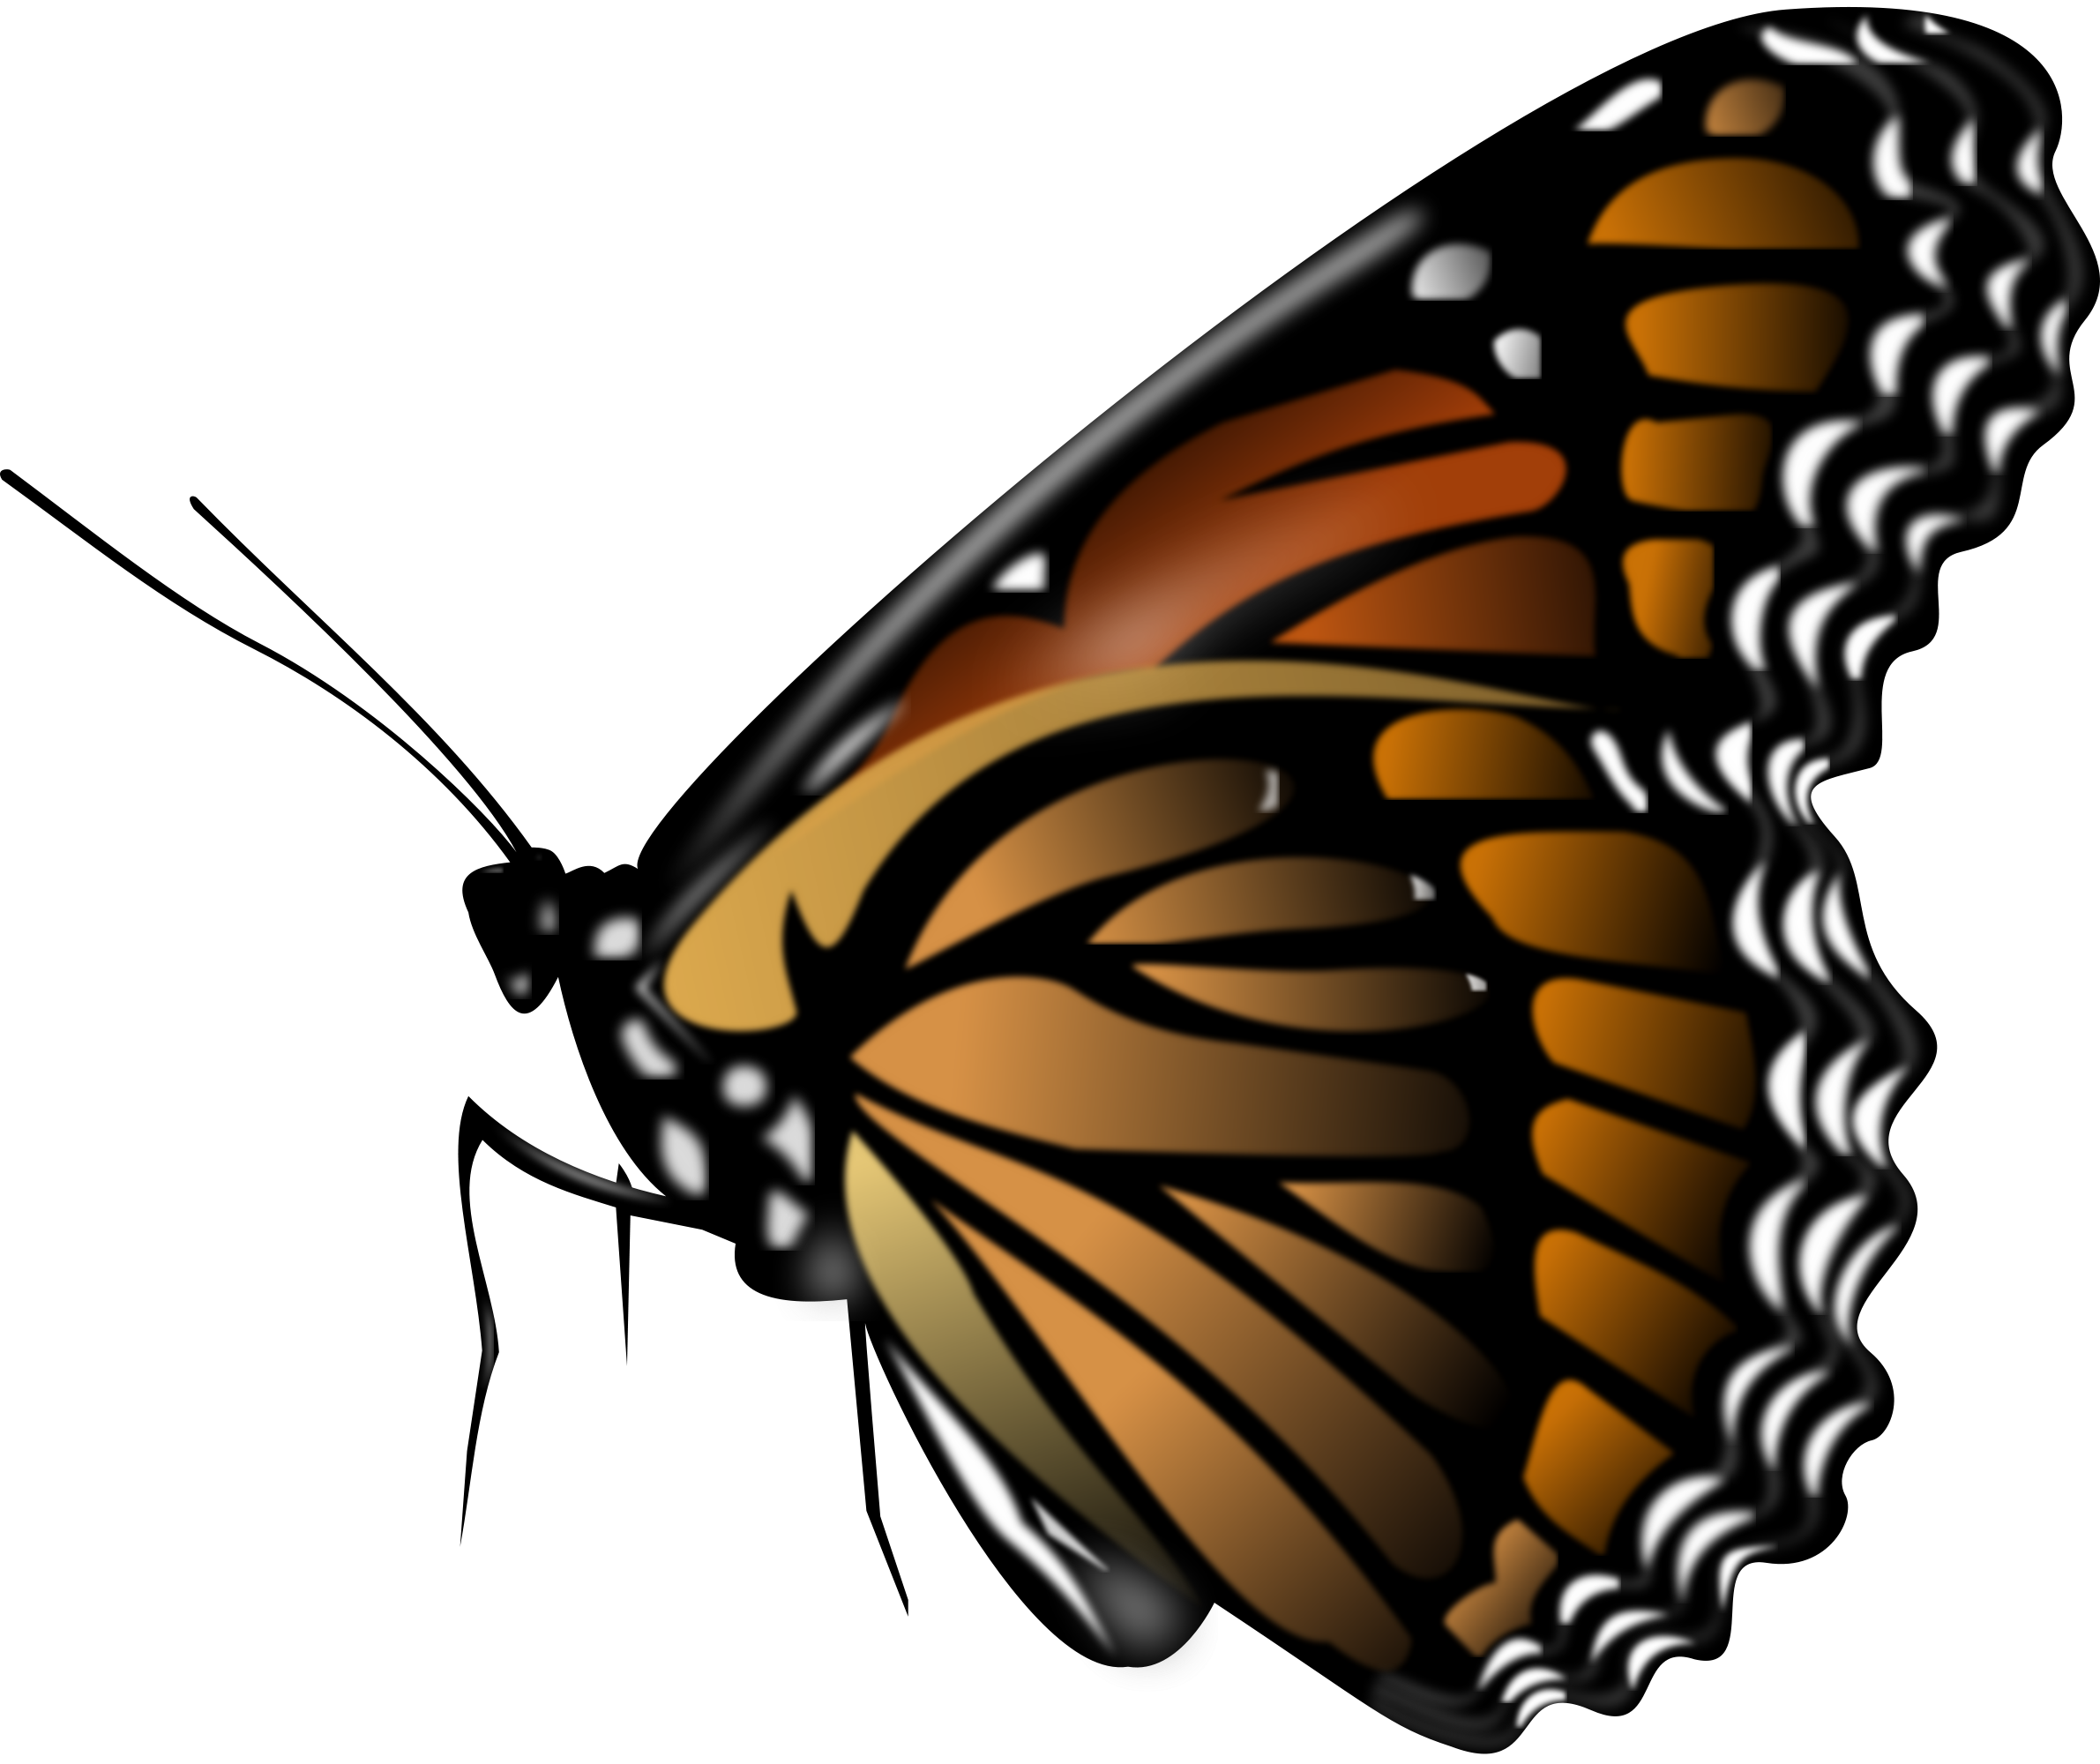 Butterfly PNG image, free picture download